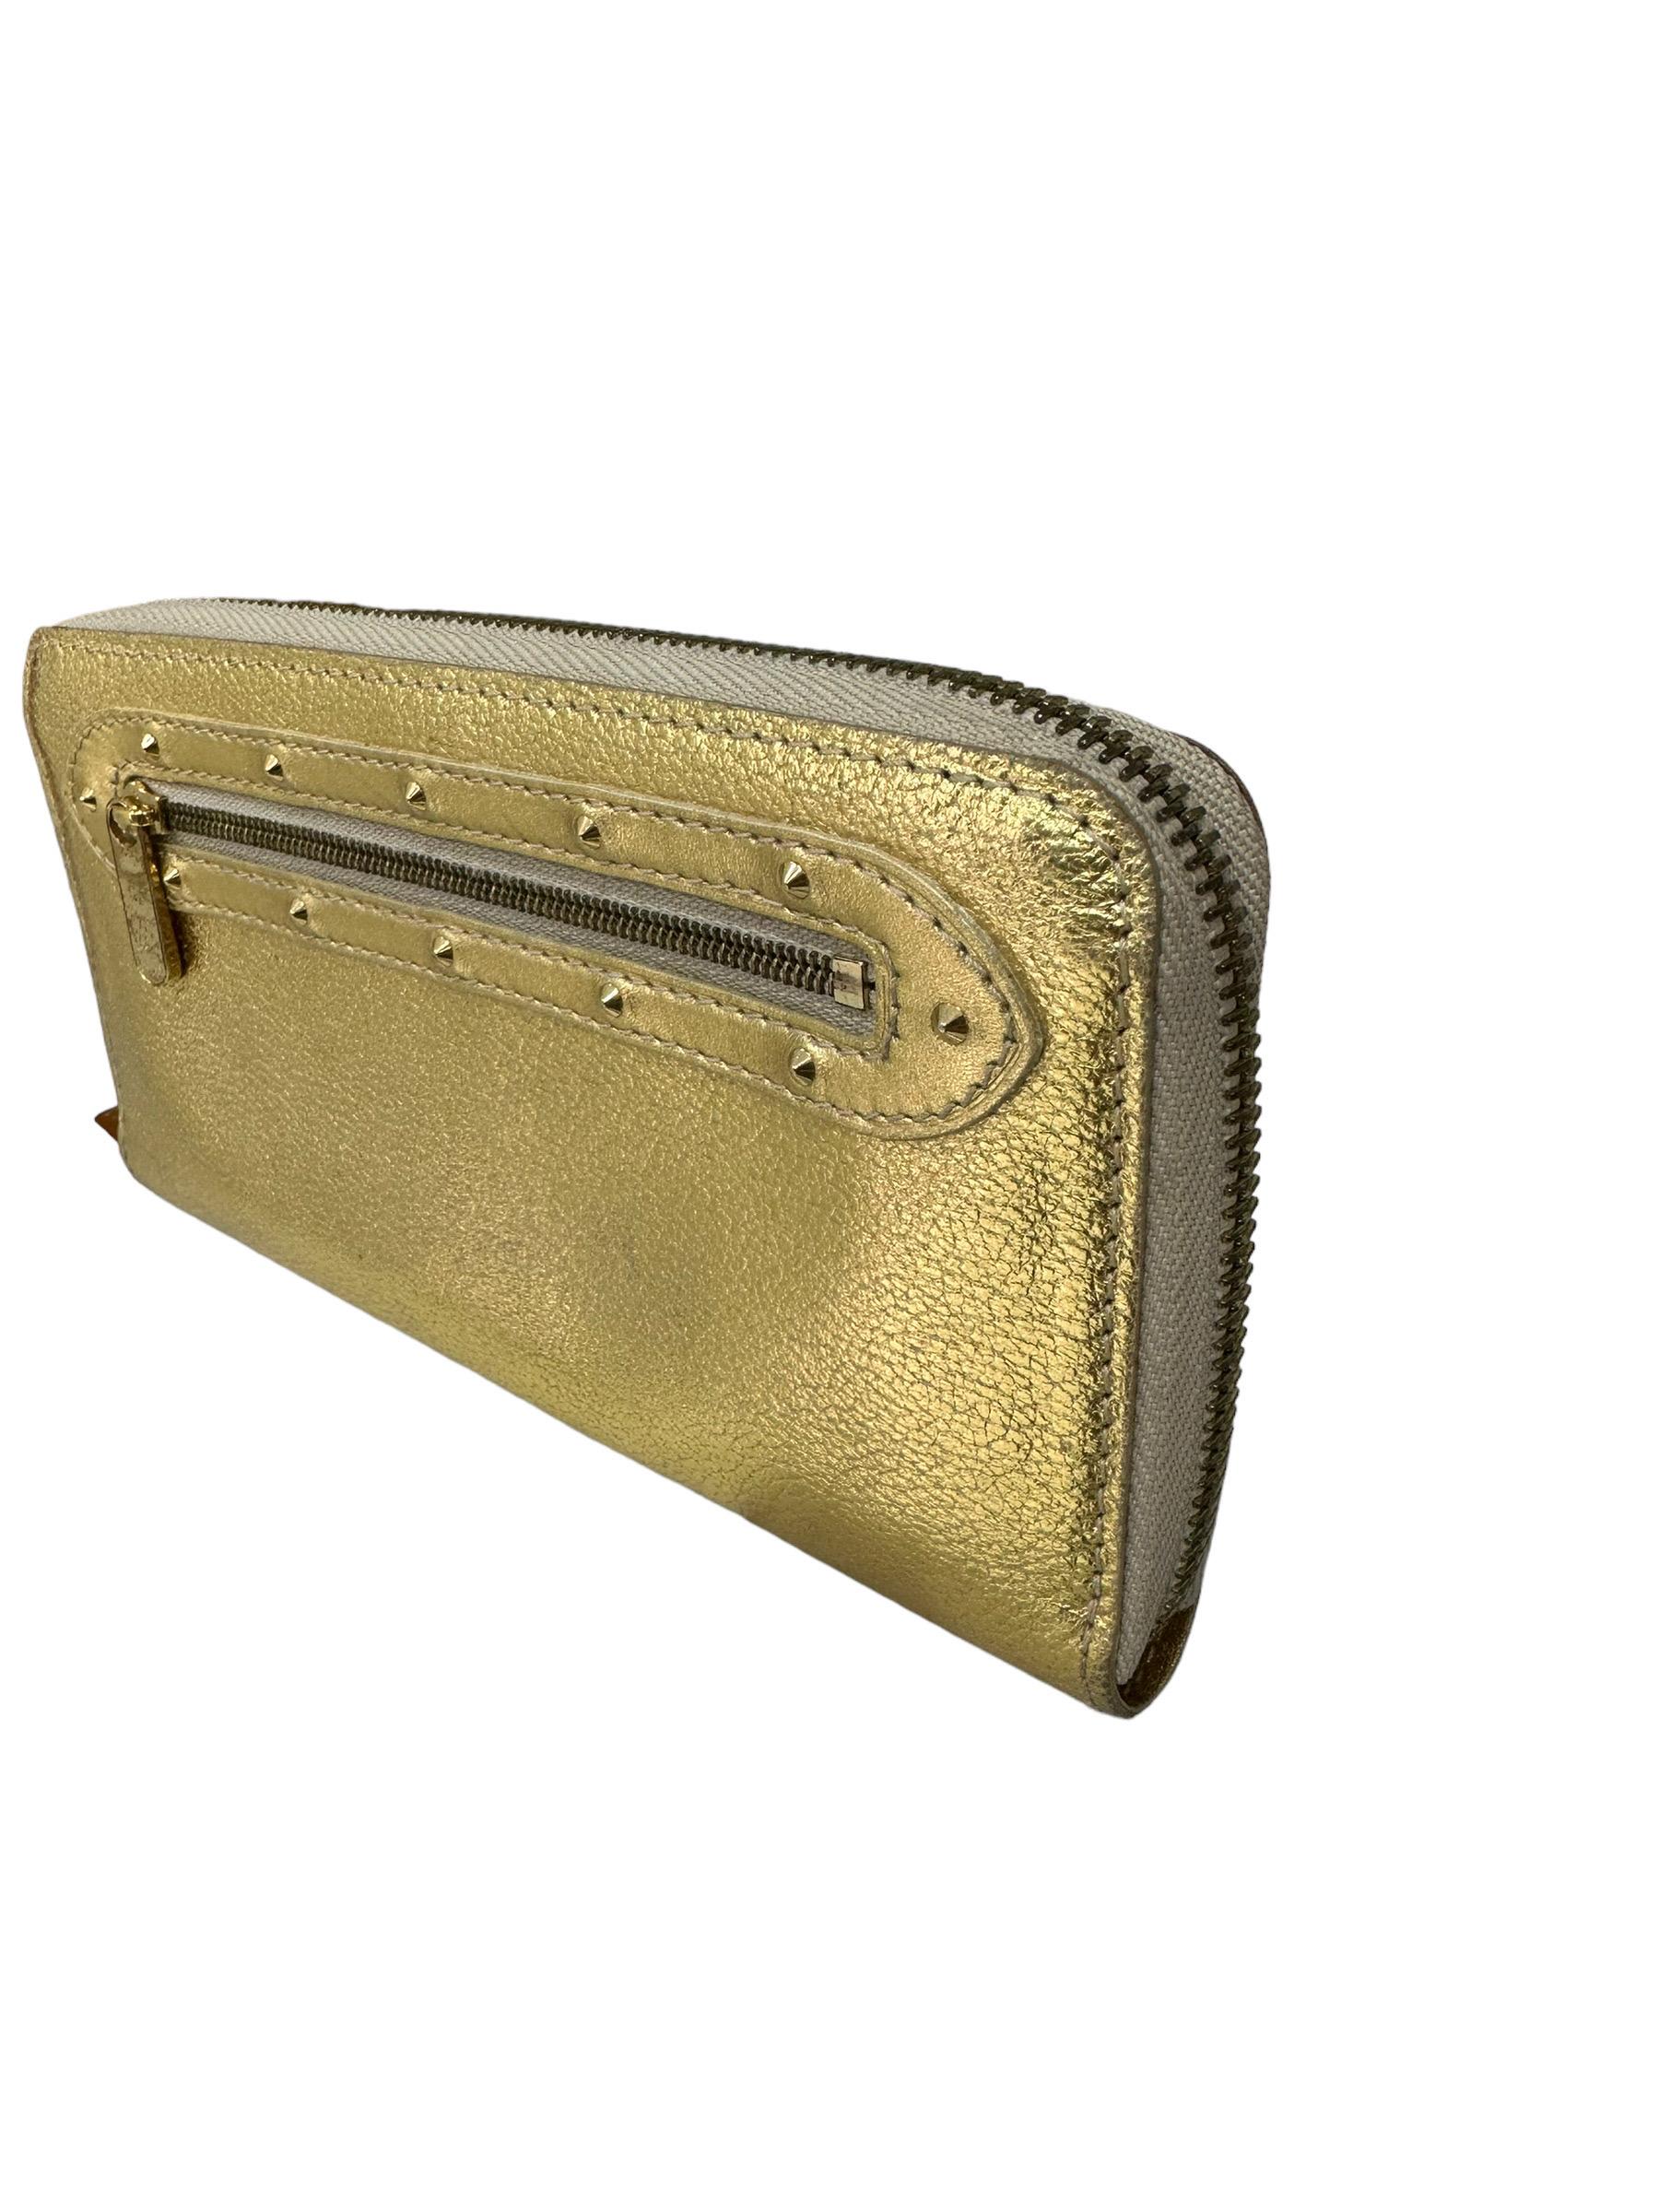 Louis Vuitton Zippy Suhali Wallet Gold Leather  In Excellent Condition For Sale In Torre Del Greco, IT